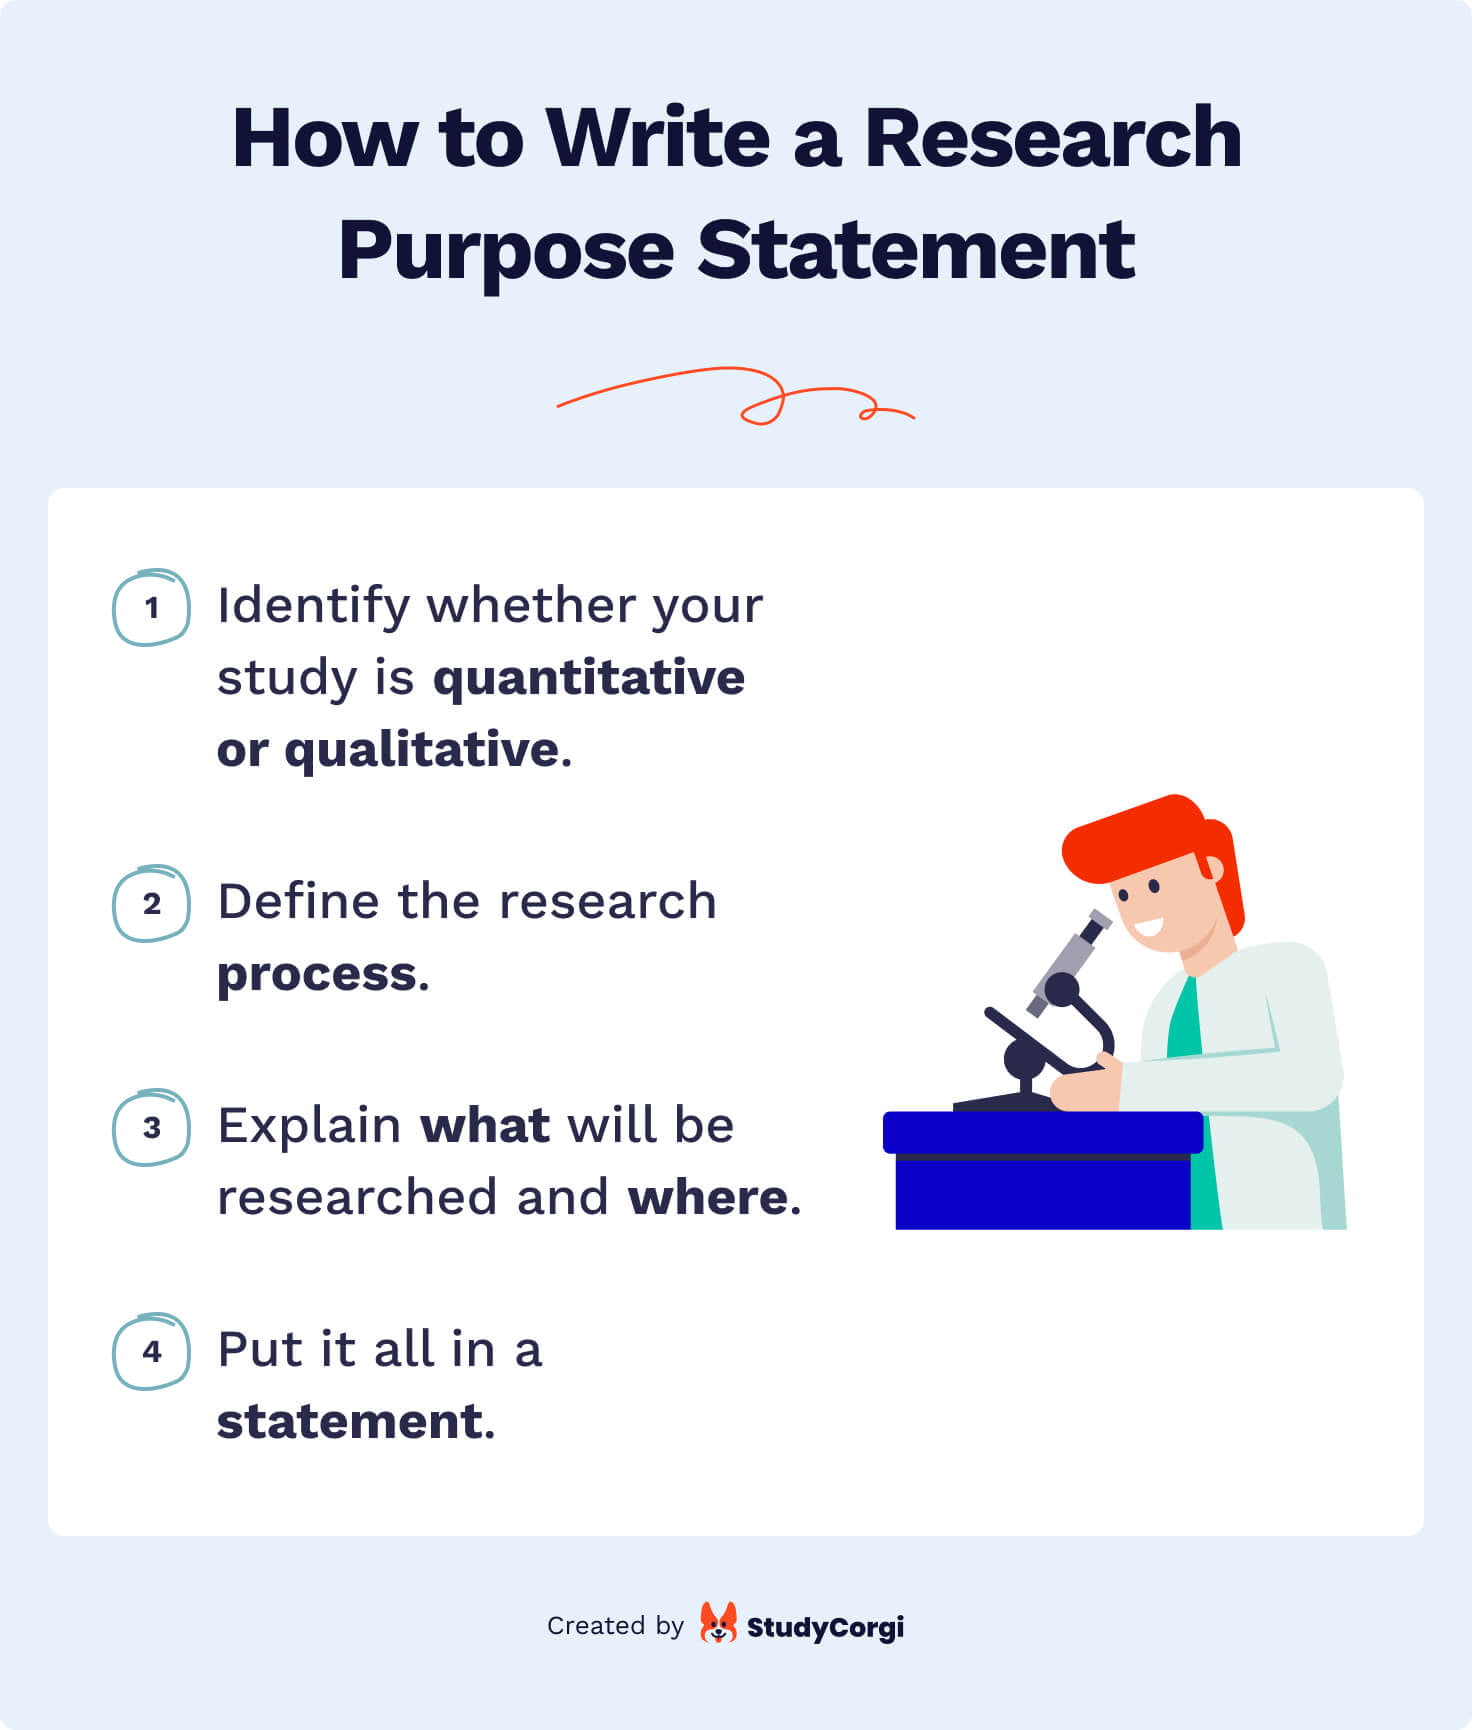 purpose statement in research questions